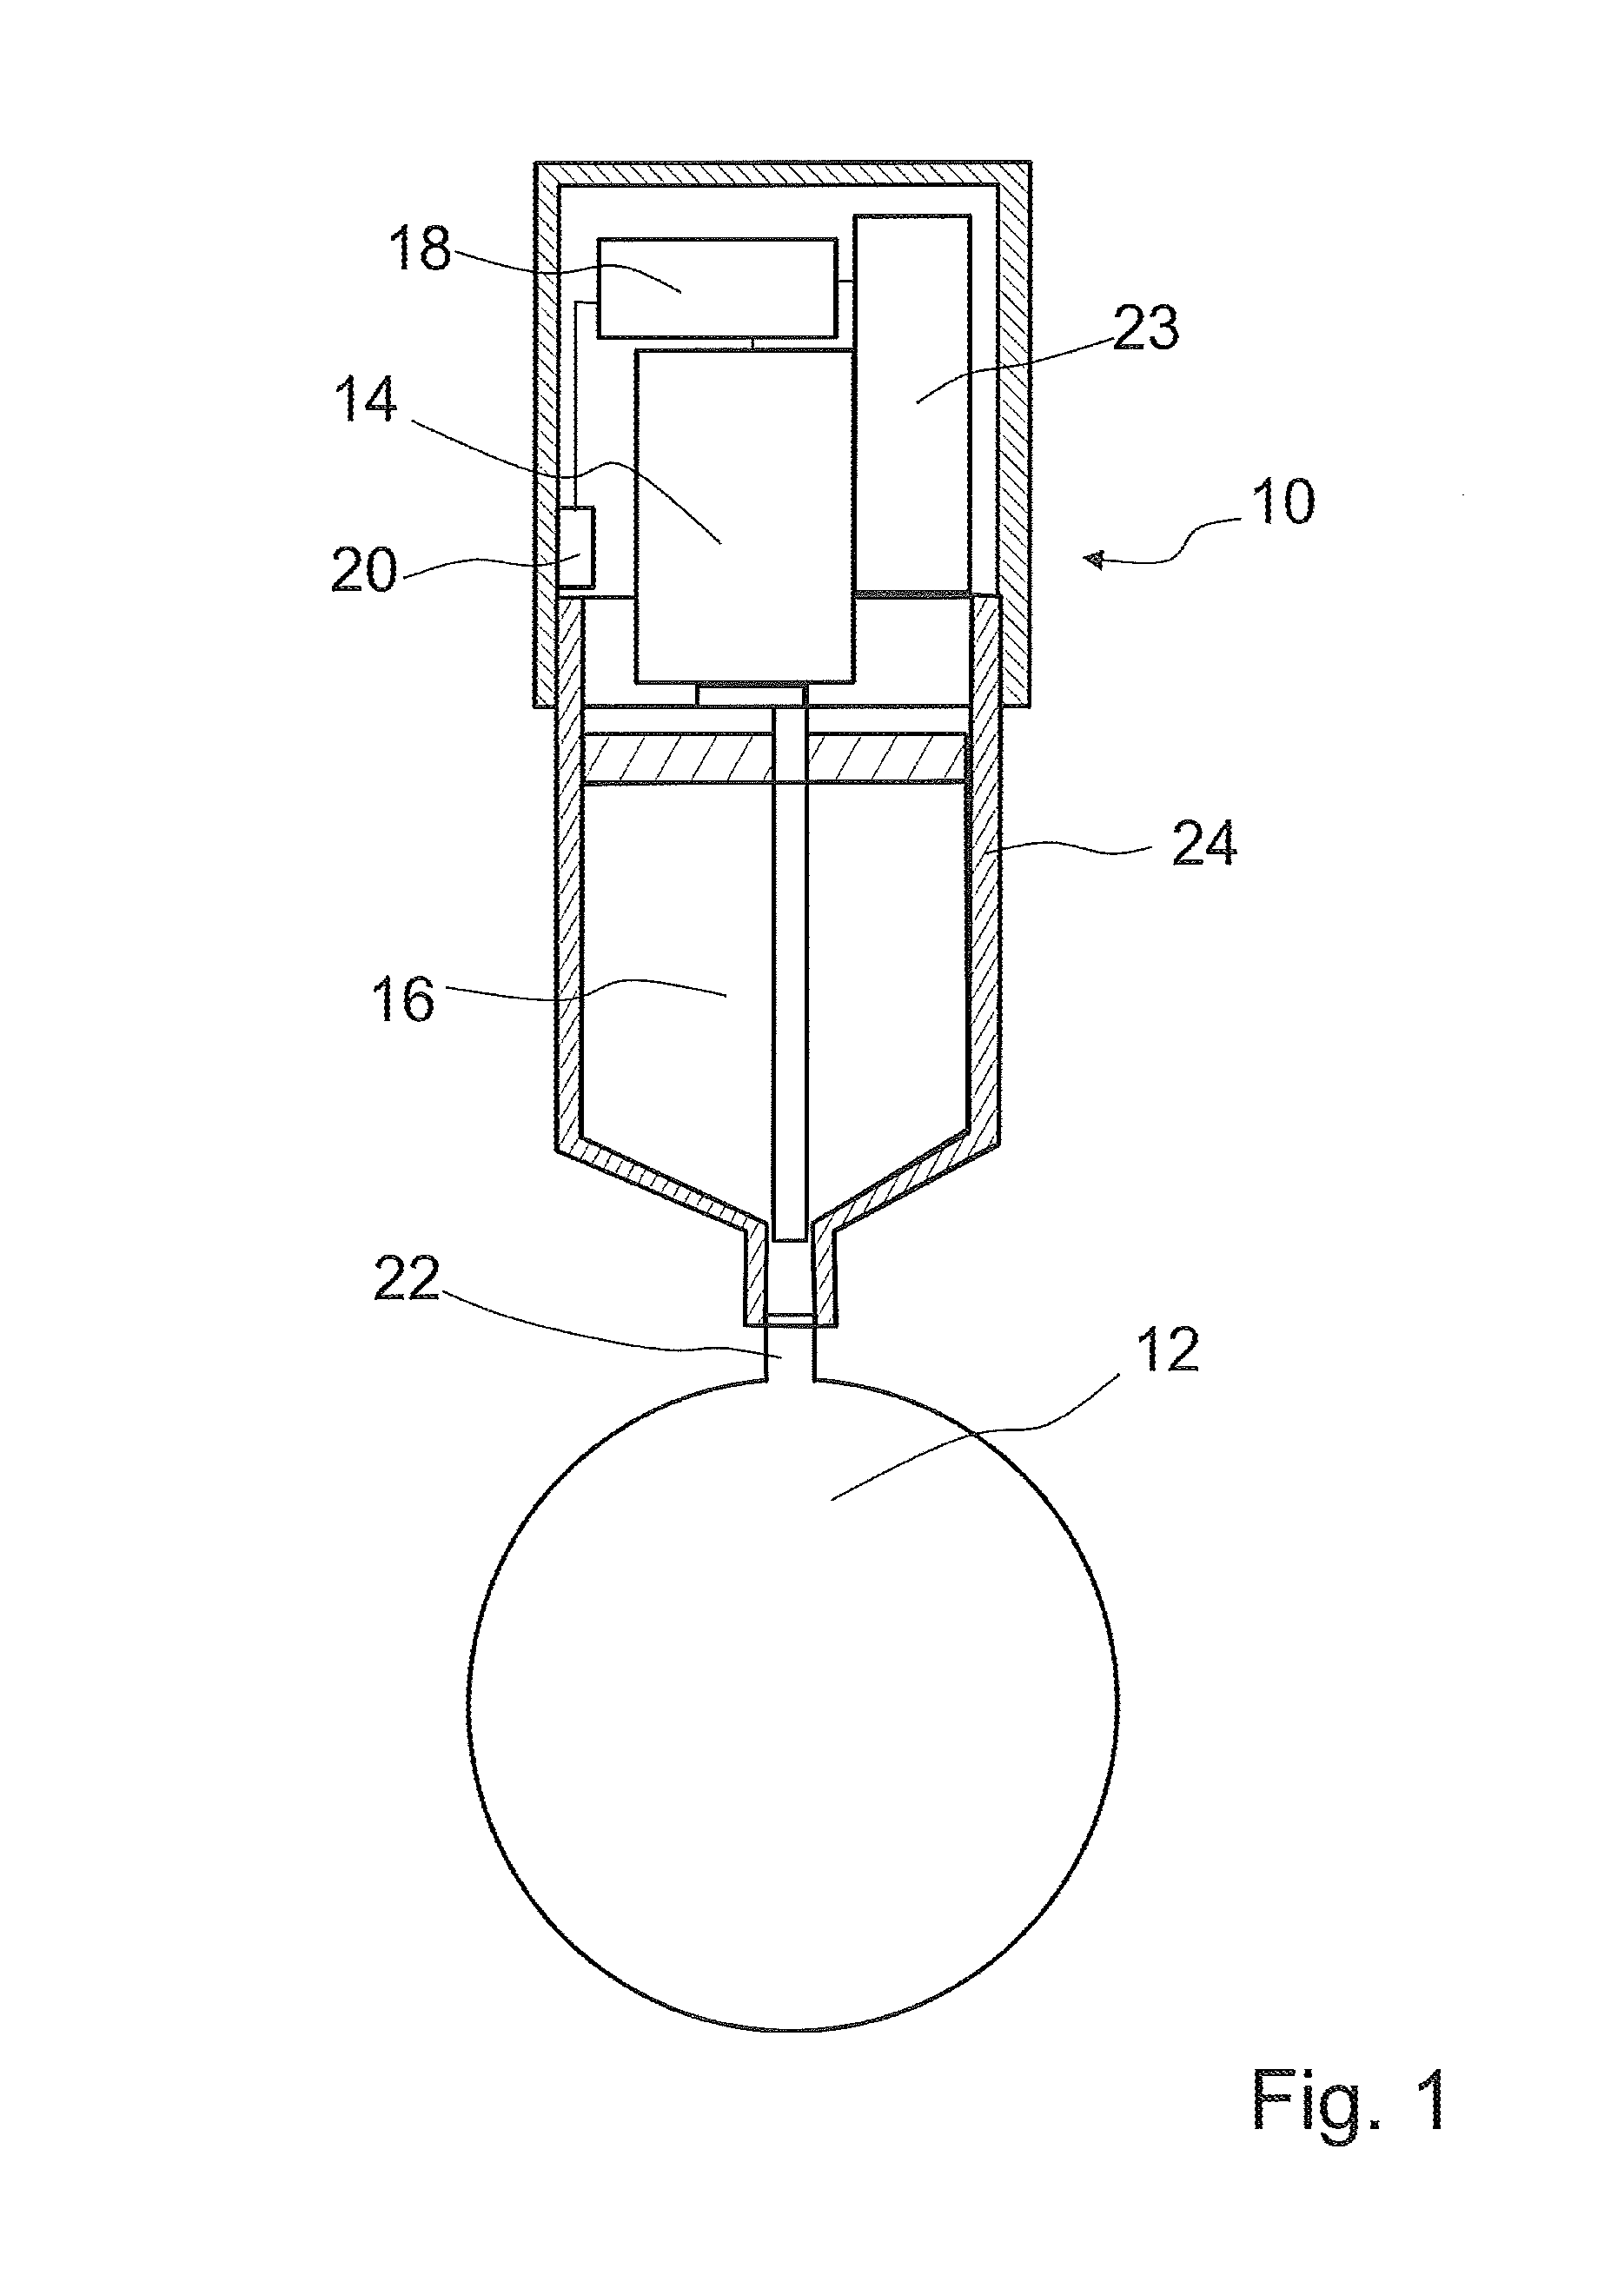 Lubricating device with a control unit for operating the lubricating pump